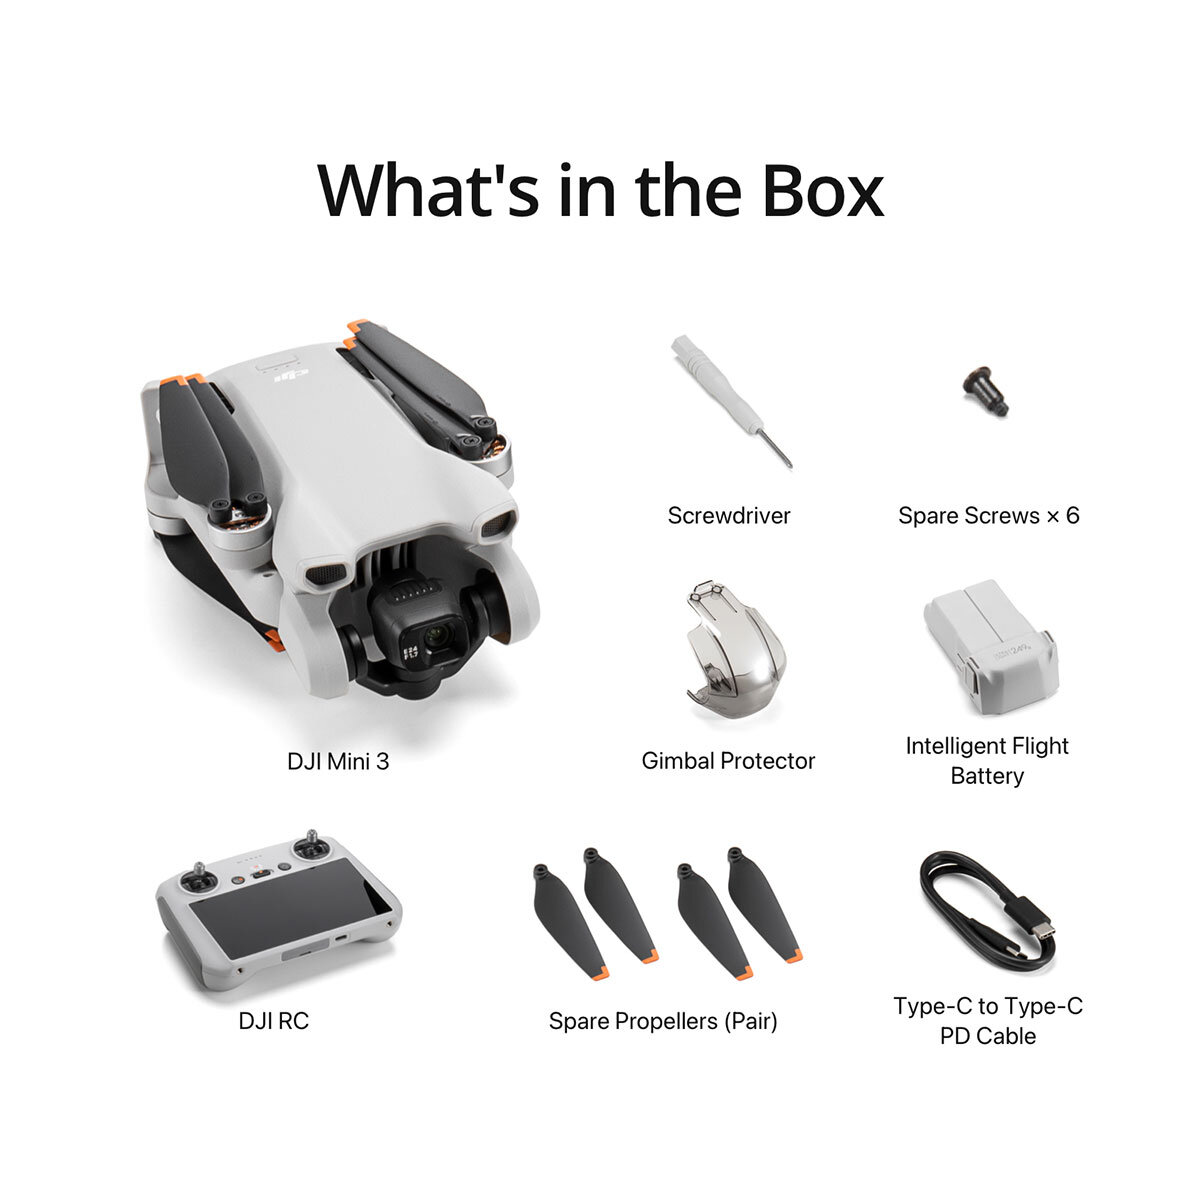 All the parts included in the DJI Mini kit